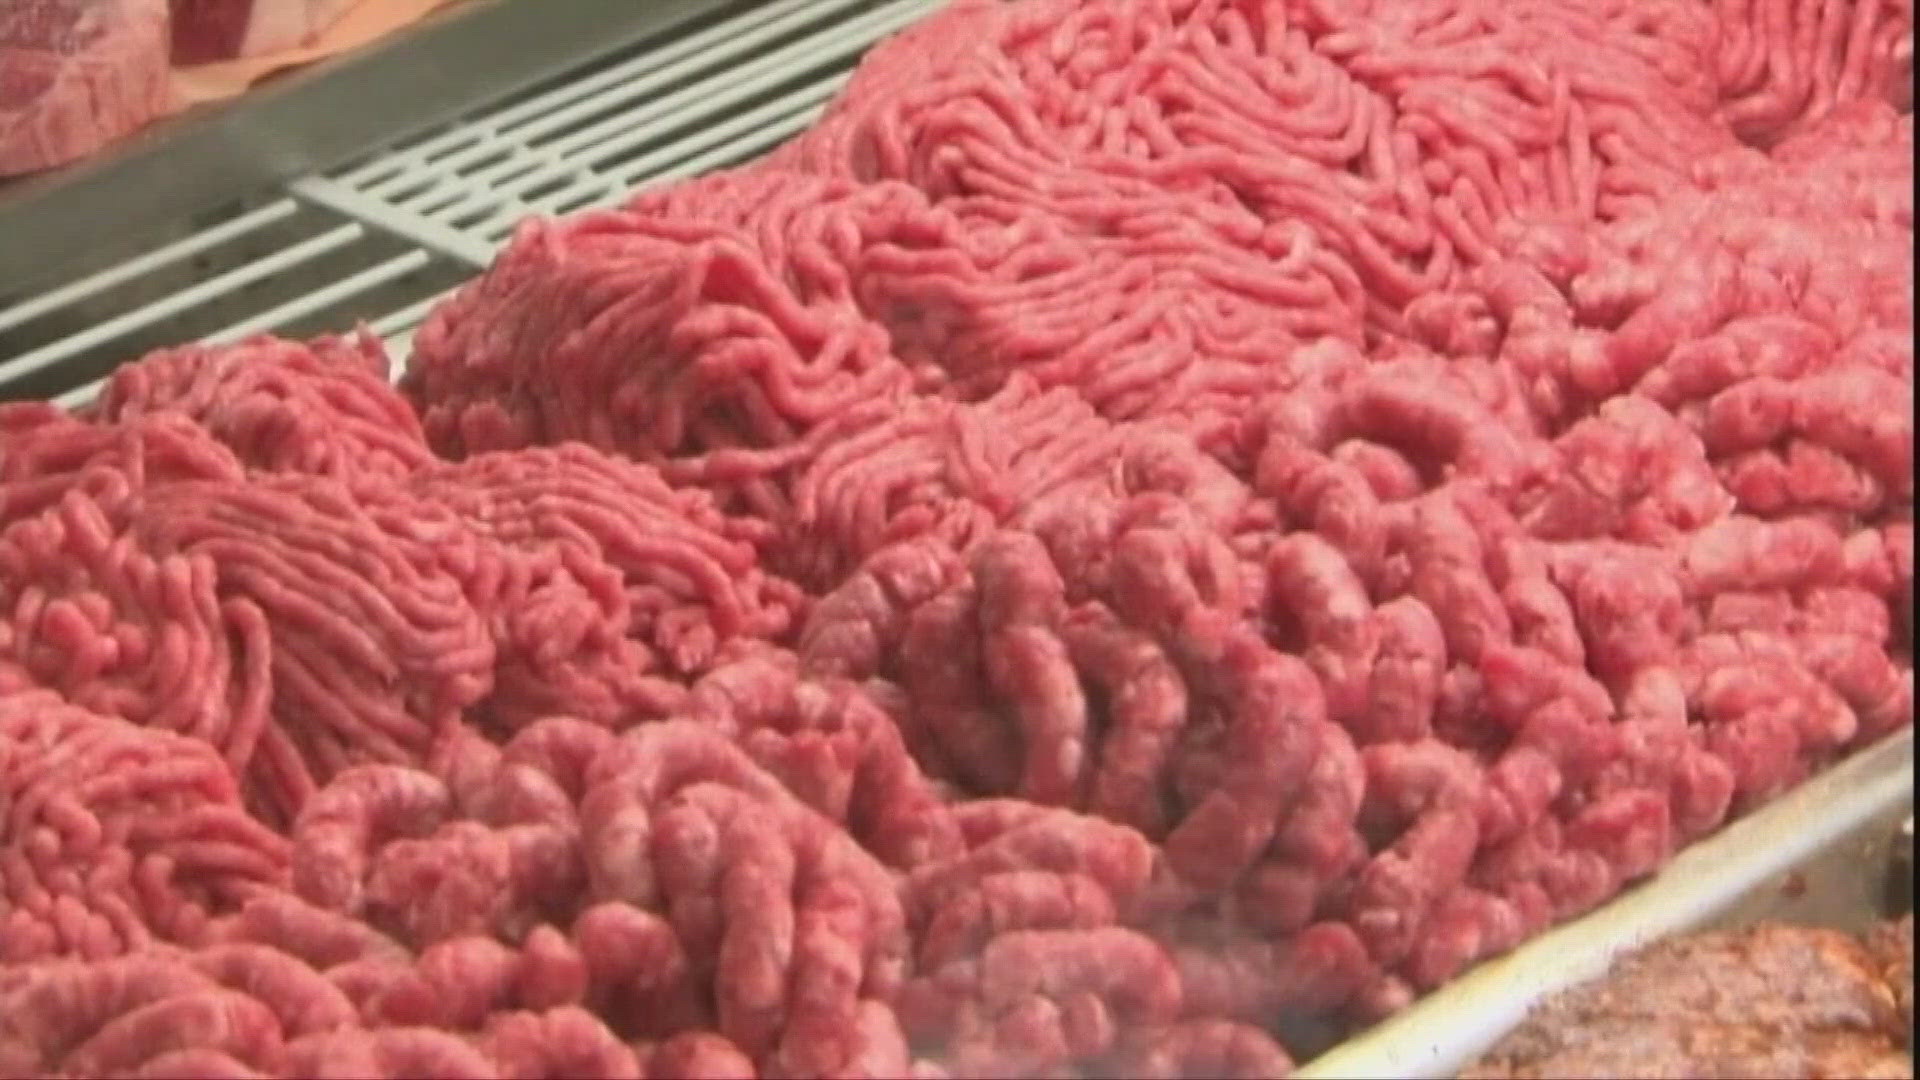 More than 16,000 pounds of ground beef sold at Walmart stores around the country have been recalled over possible E. coli contamination.